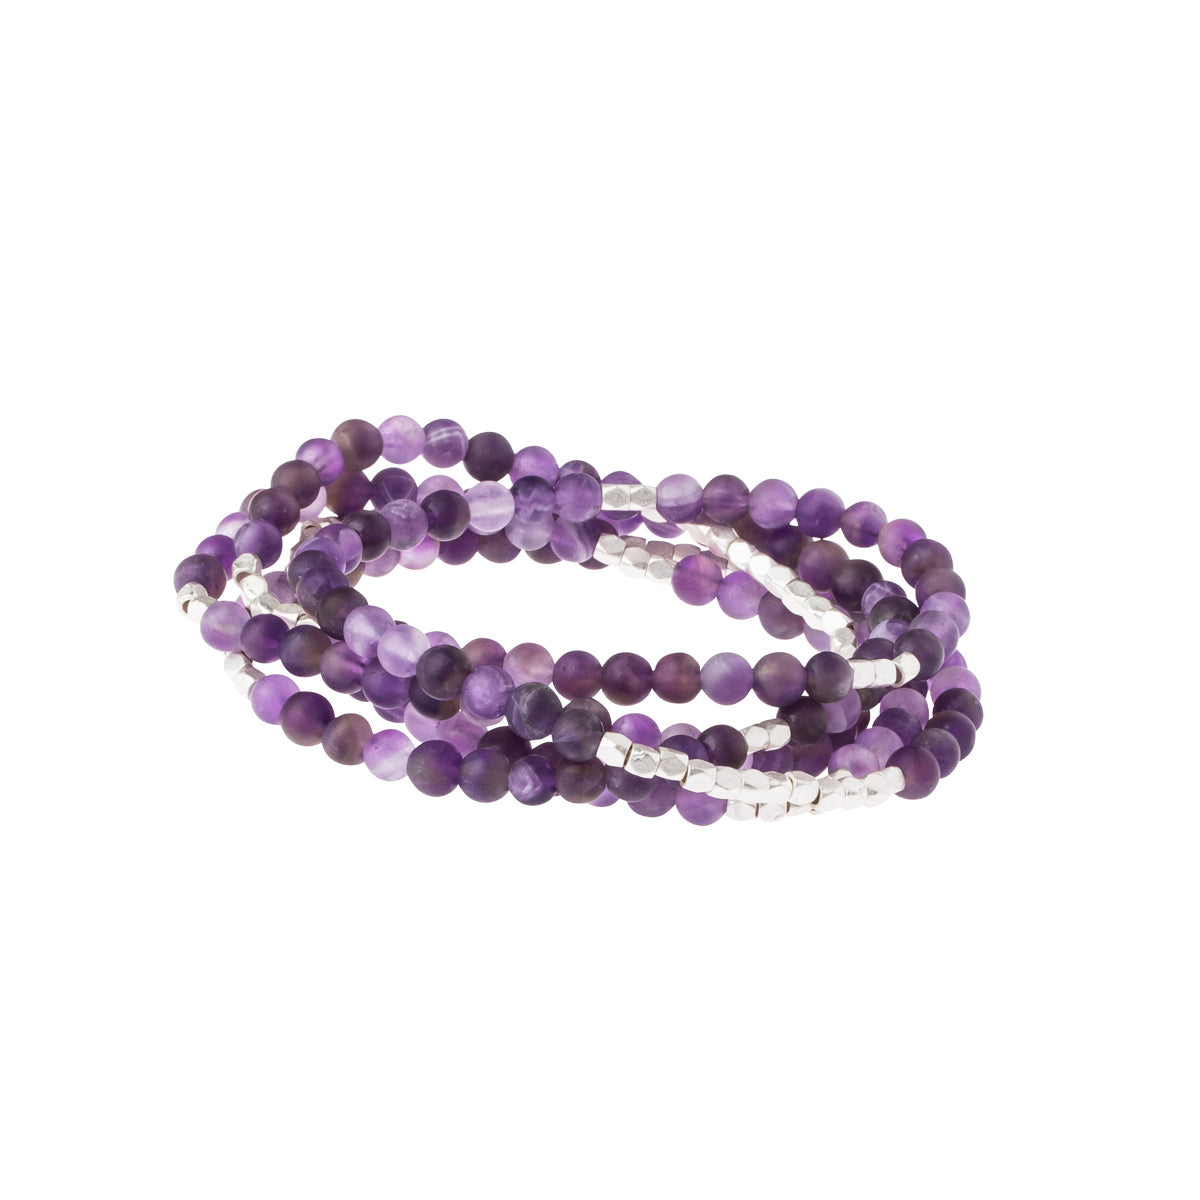 4.5 millimeter Amythyst beads interspersed with silver beads wrapped four times to form a bracelet, shown on a white background.